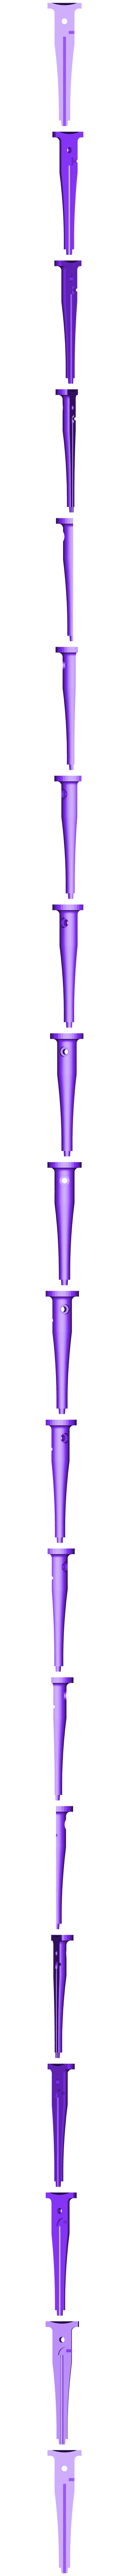 .050-Screw_Side.STL Download free STL file Allen Wrench Handle, T-Handle • Object to 3D print, Tarnliare